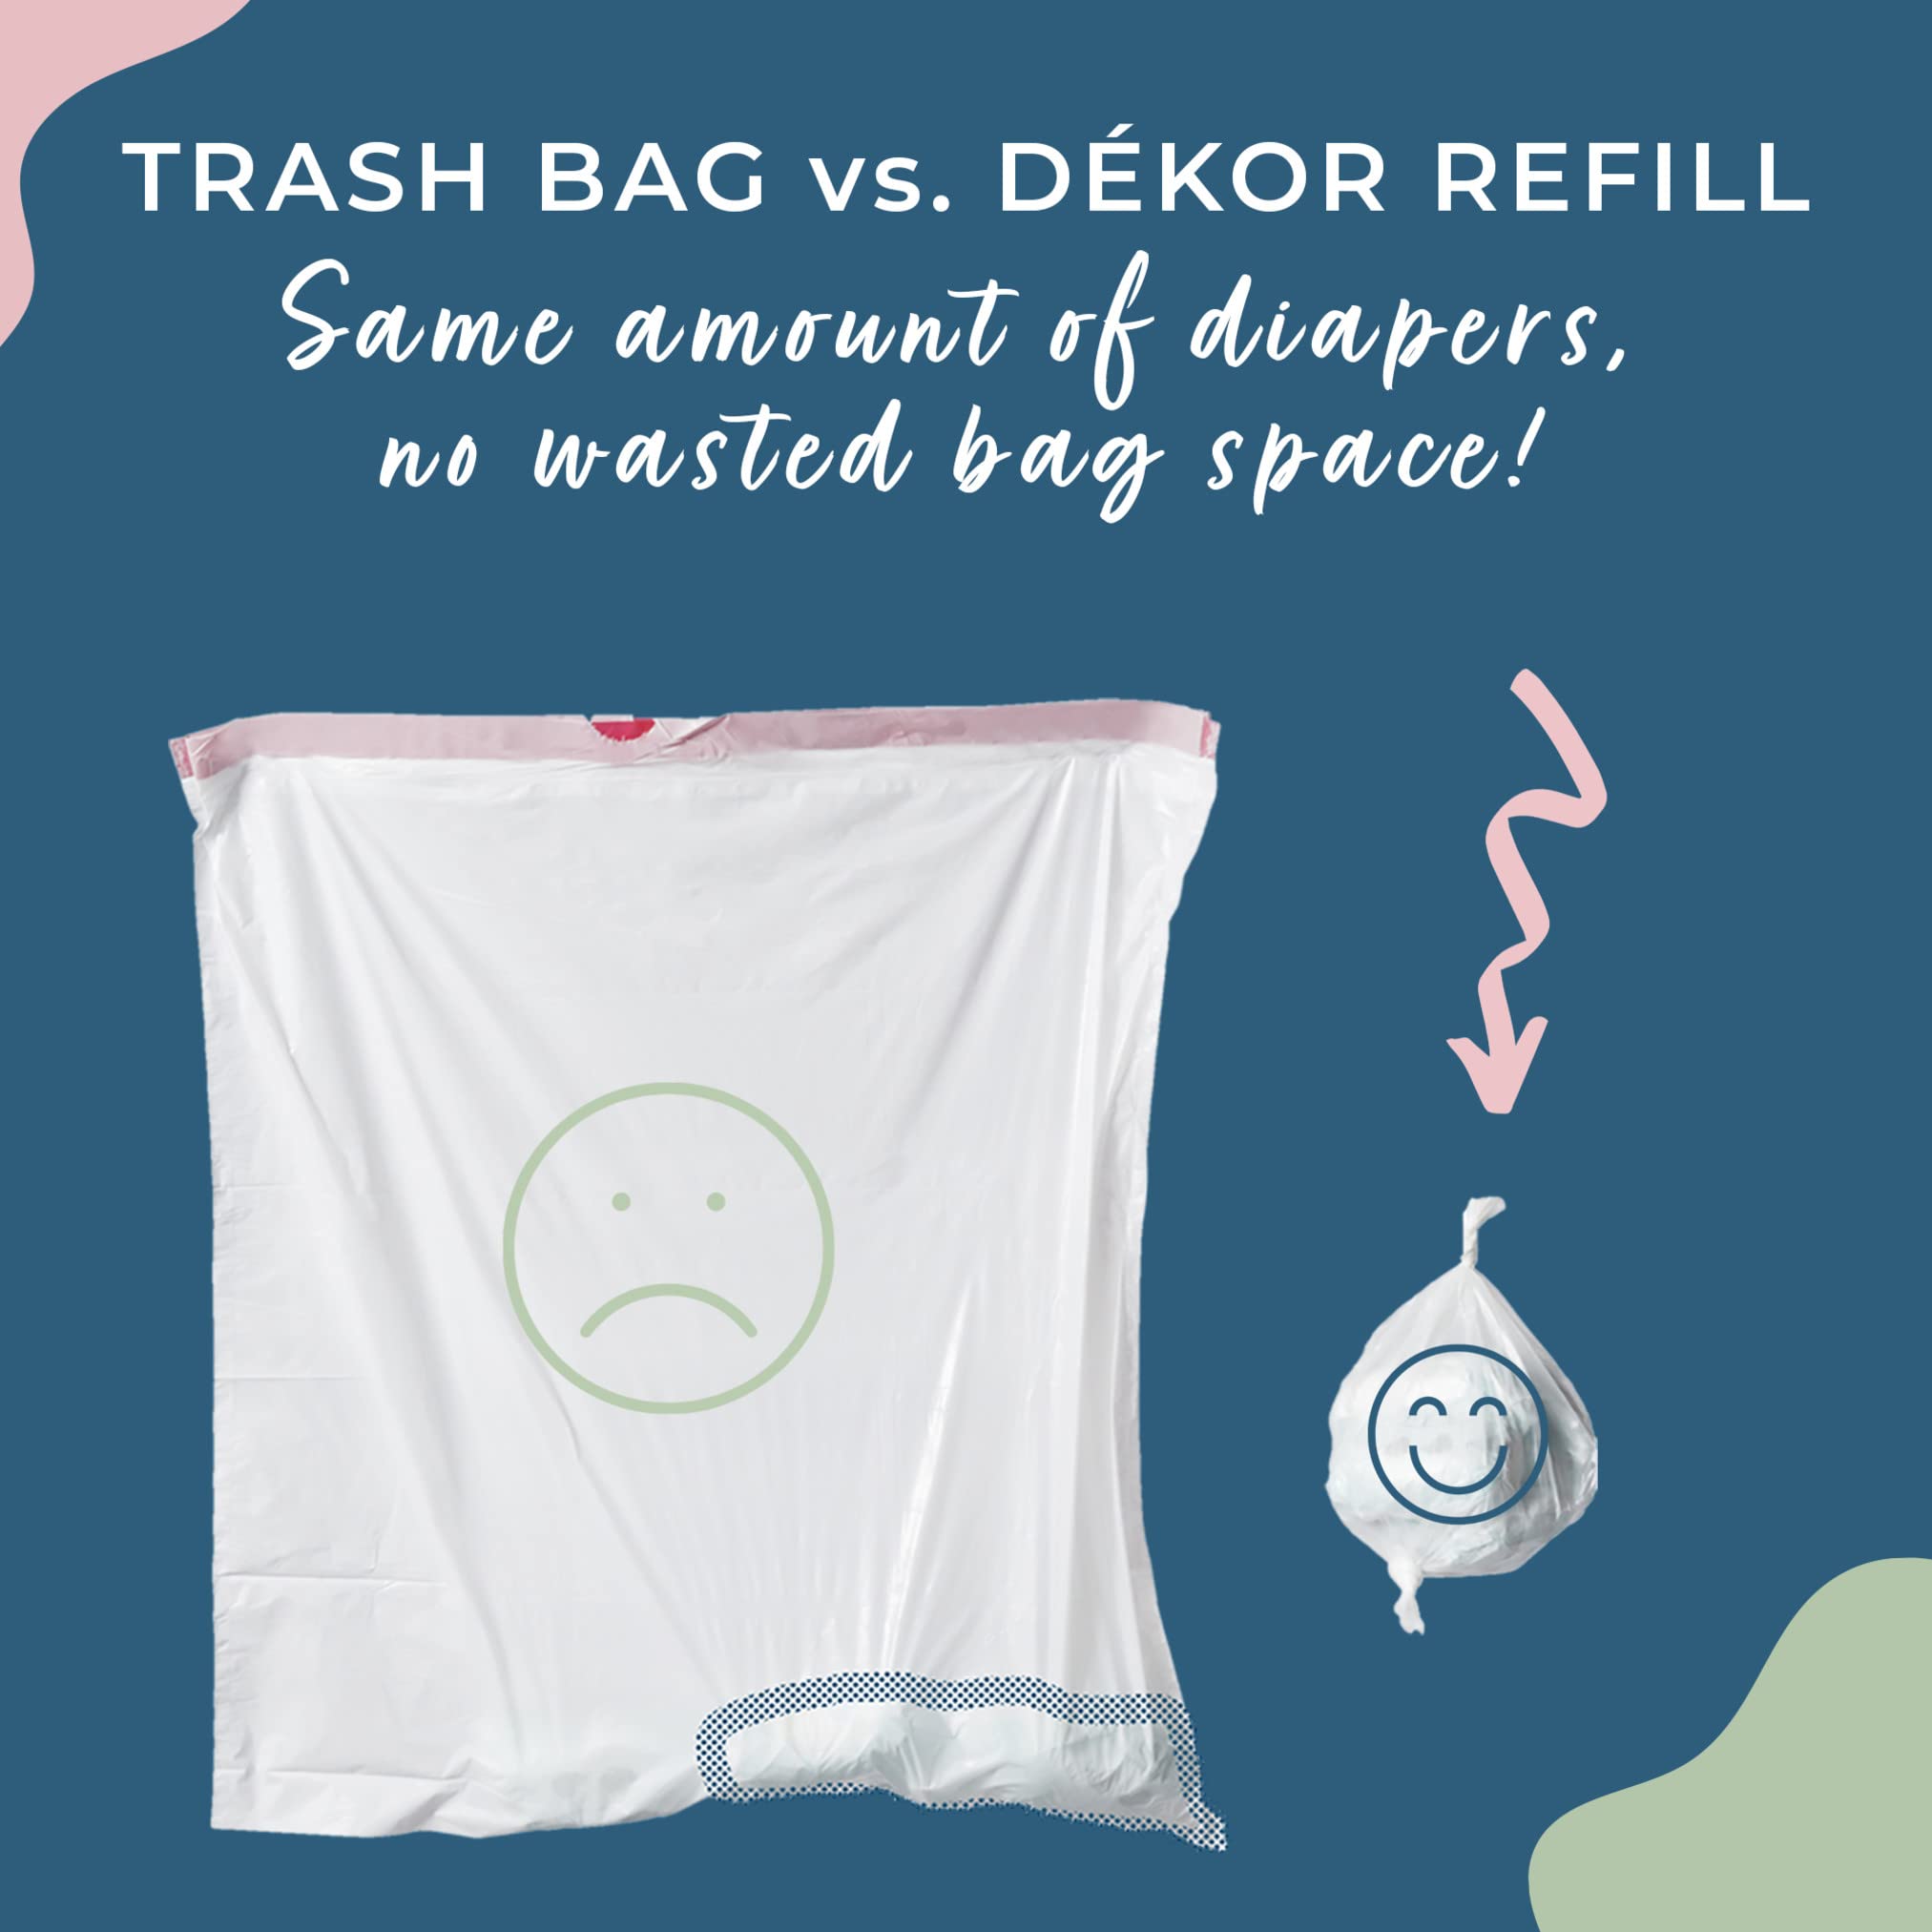 Dekor Classic Diaper Pail Refills|2 Count|Most Economical Refill System|Quick & Easy to Replace|No Preset Bag Size – Use Only What You Need|Exclusive End-of-Liner Marking|Baby Powder Scent